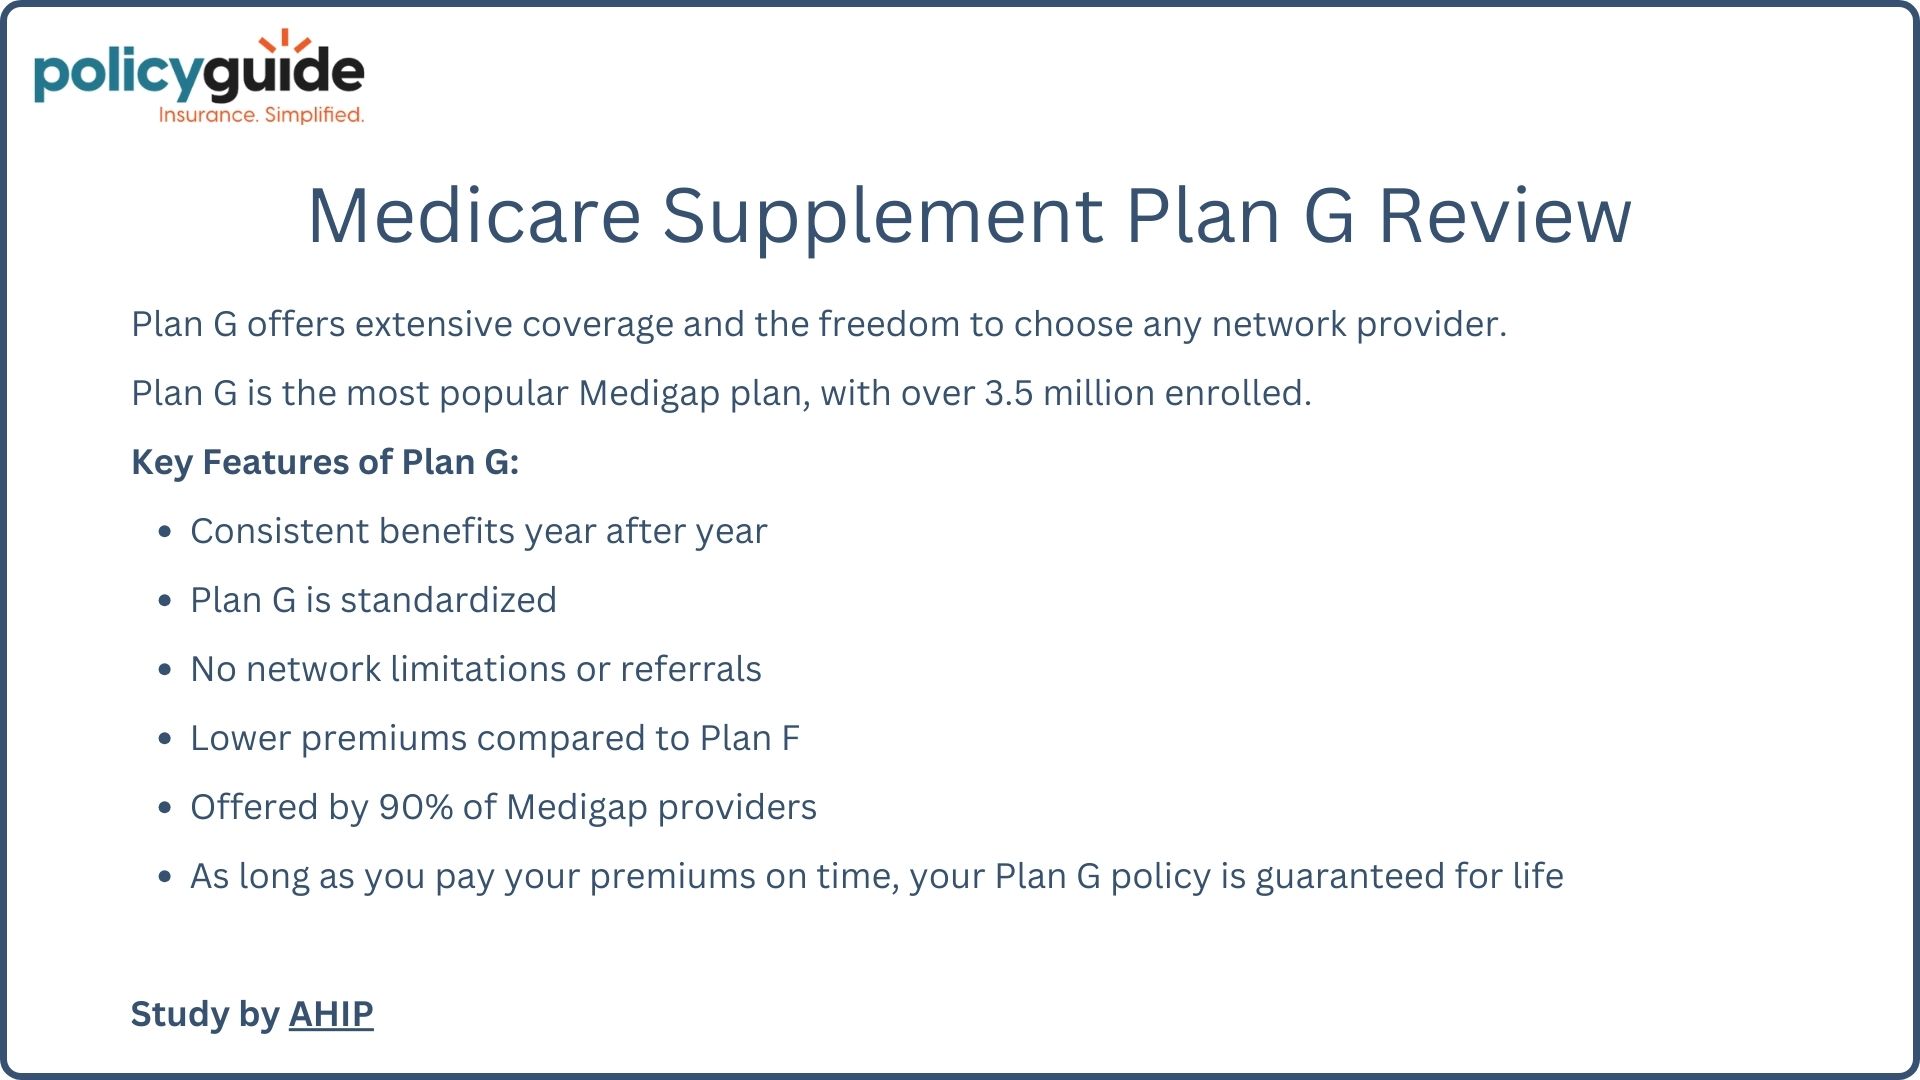 Medicare Supplement Plan G Review